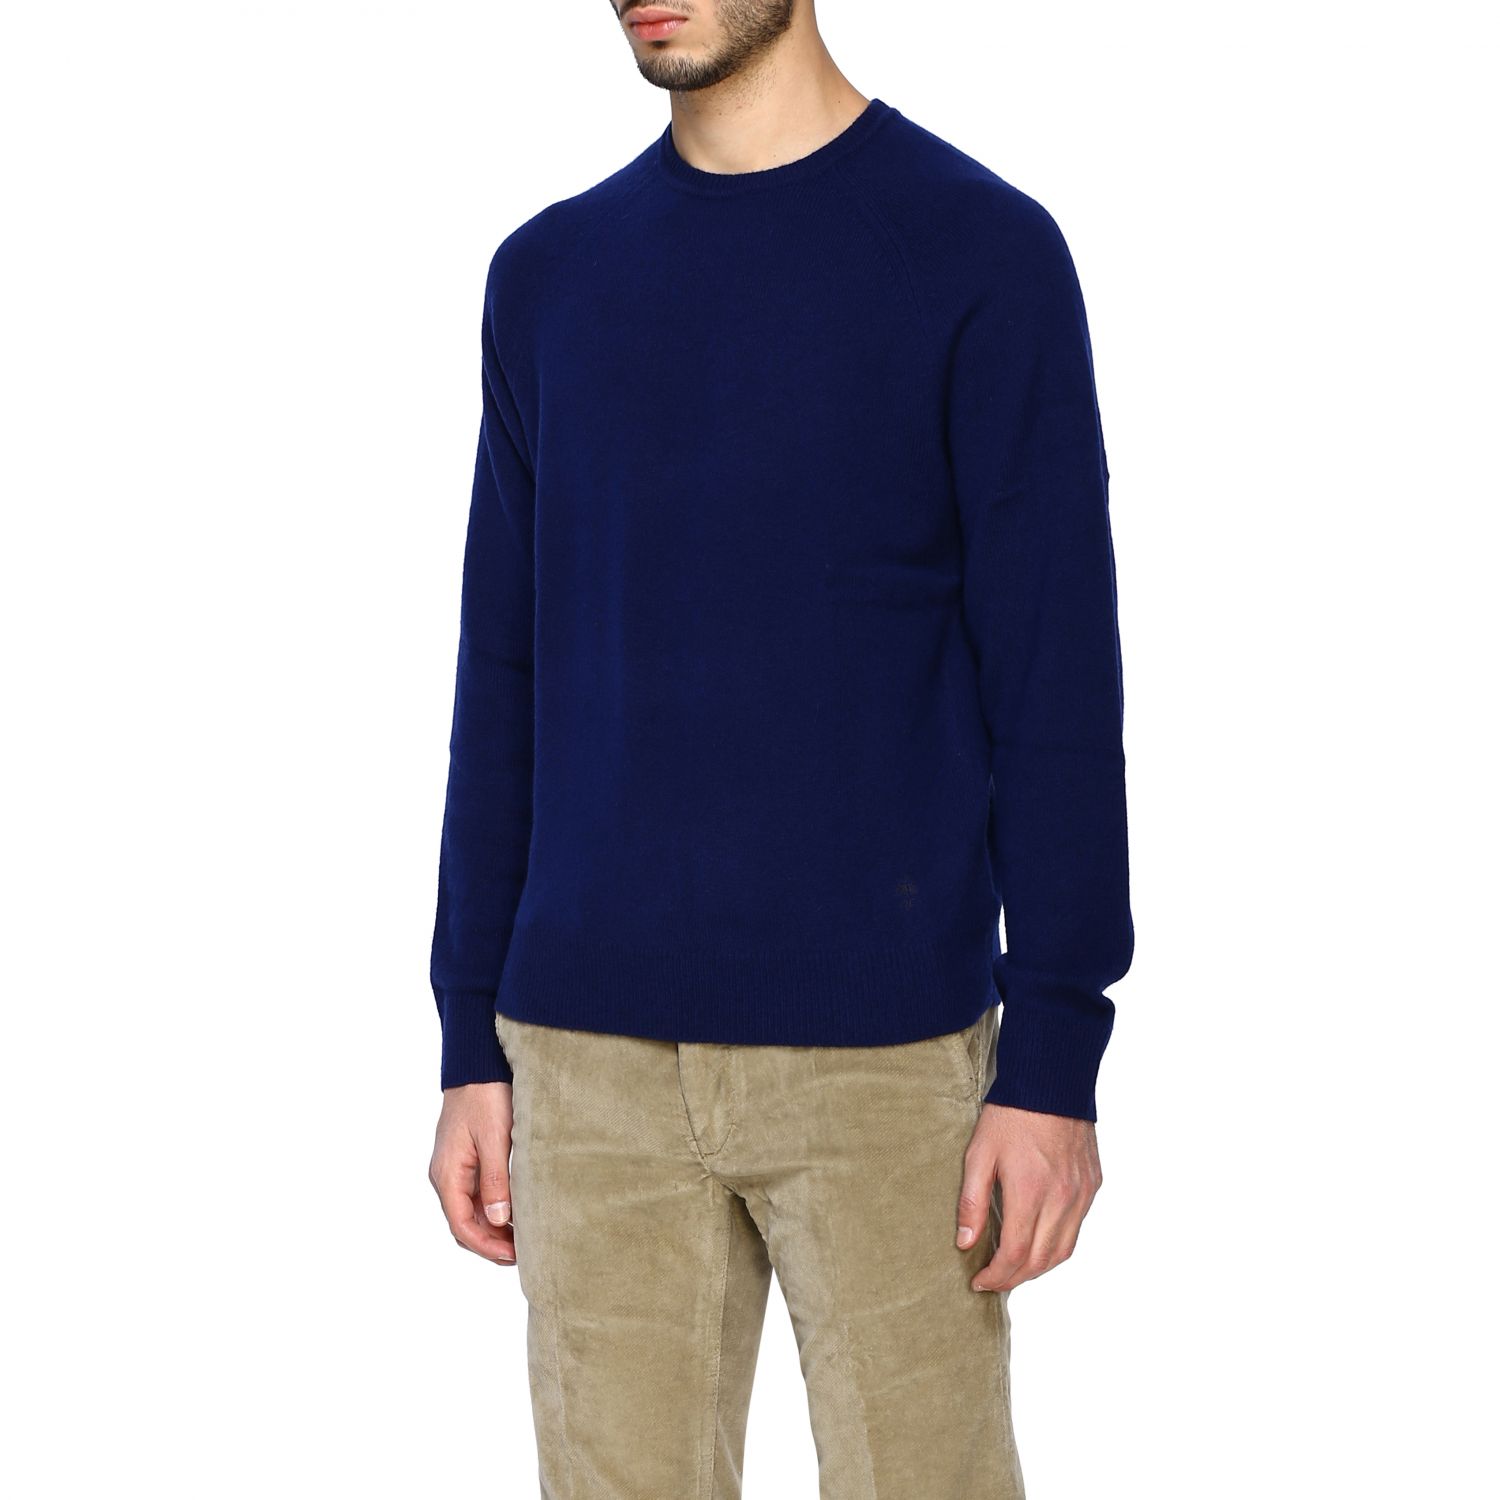 Brooks Brothers Outlet: Sweater men - Navy | Sweater Brooks Brothers ...